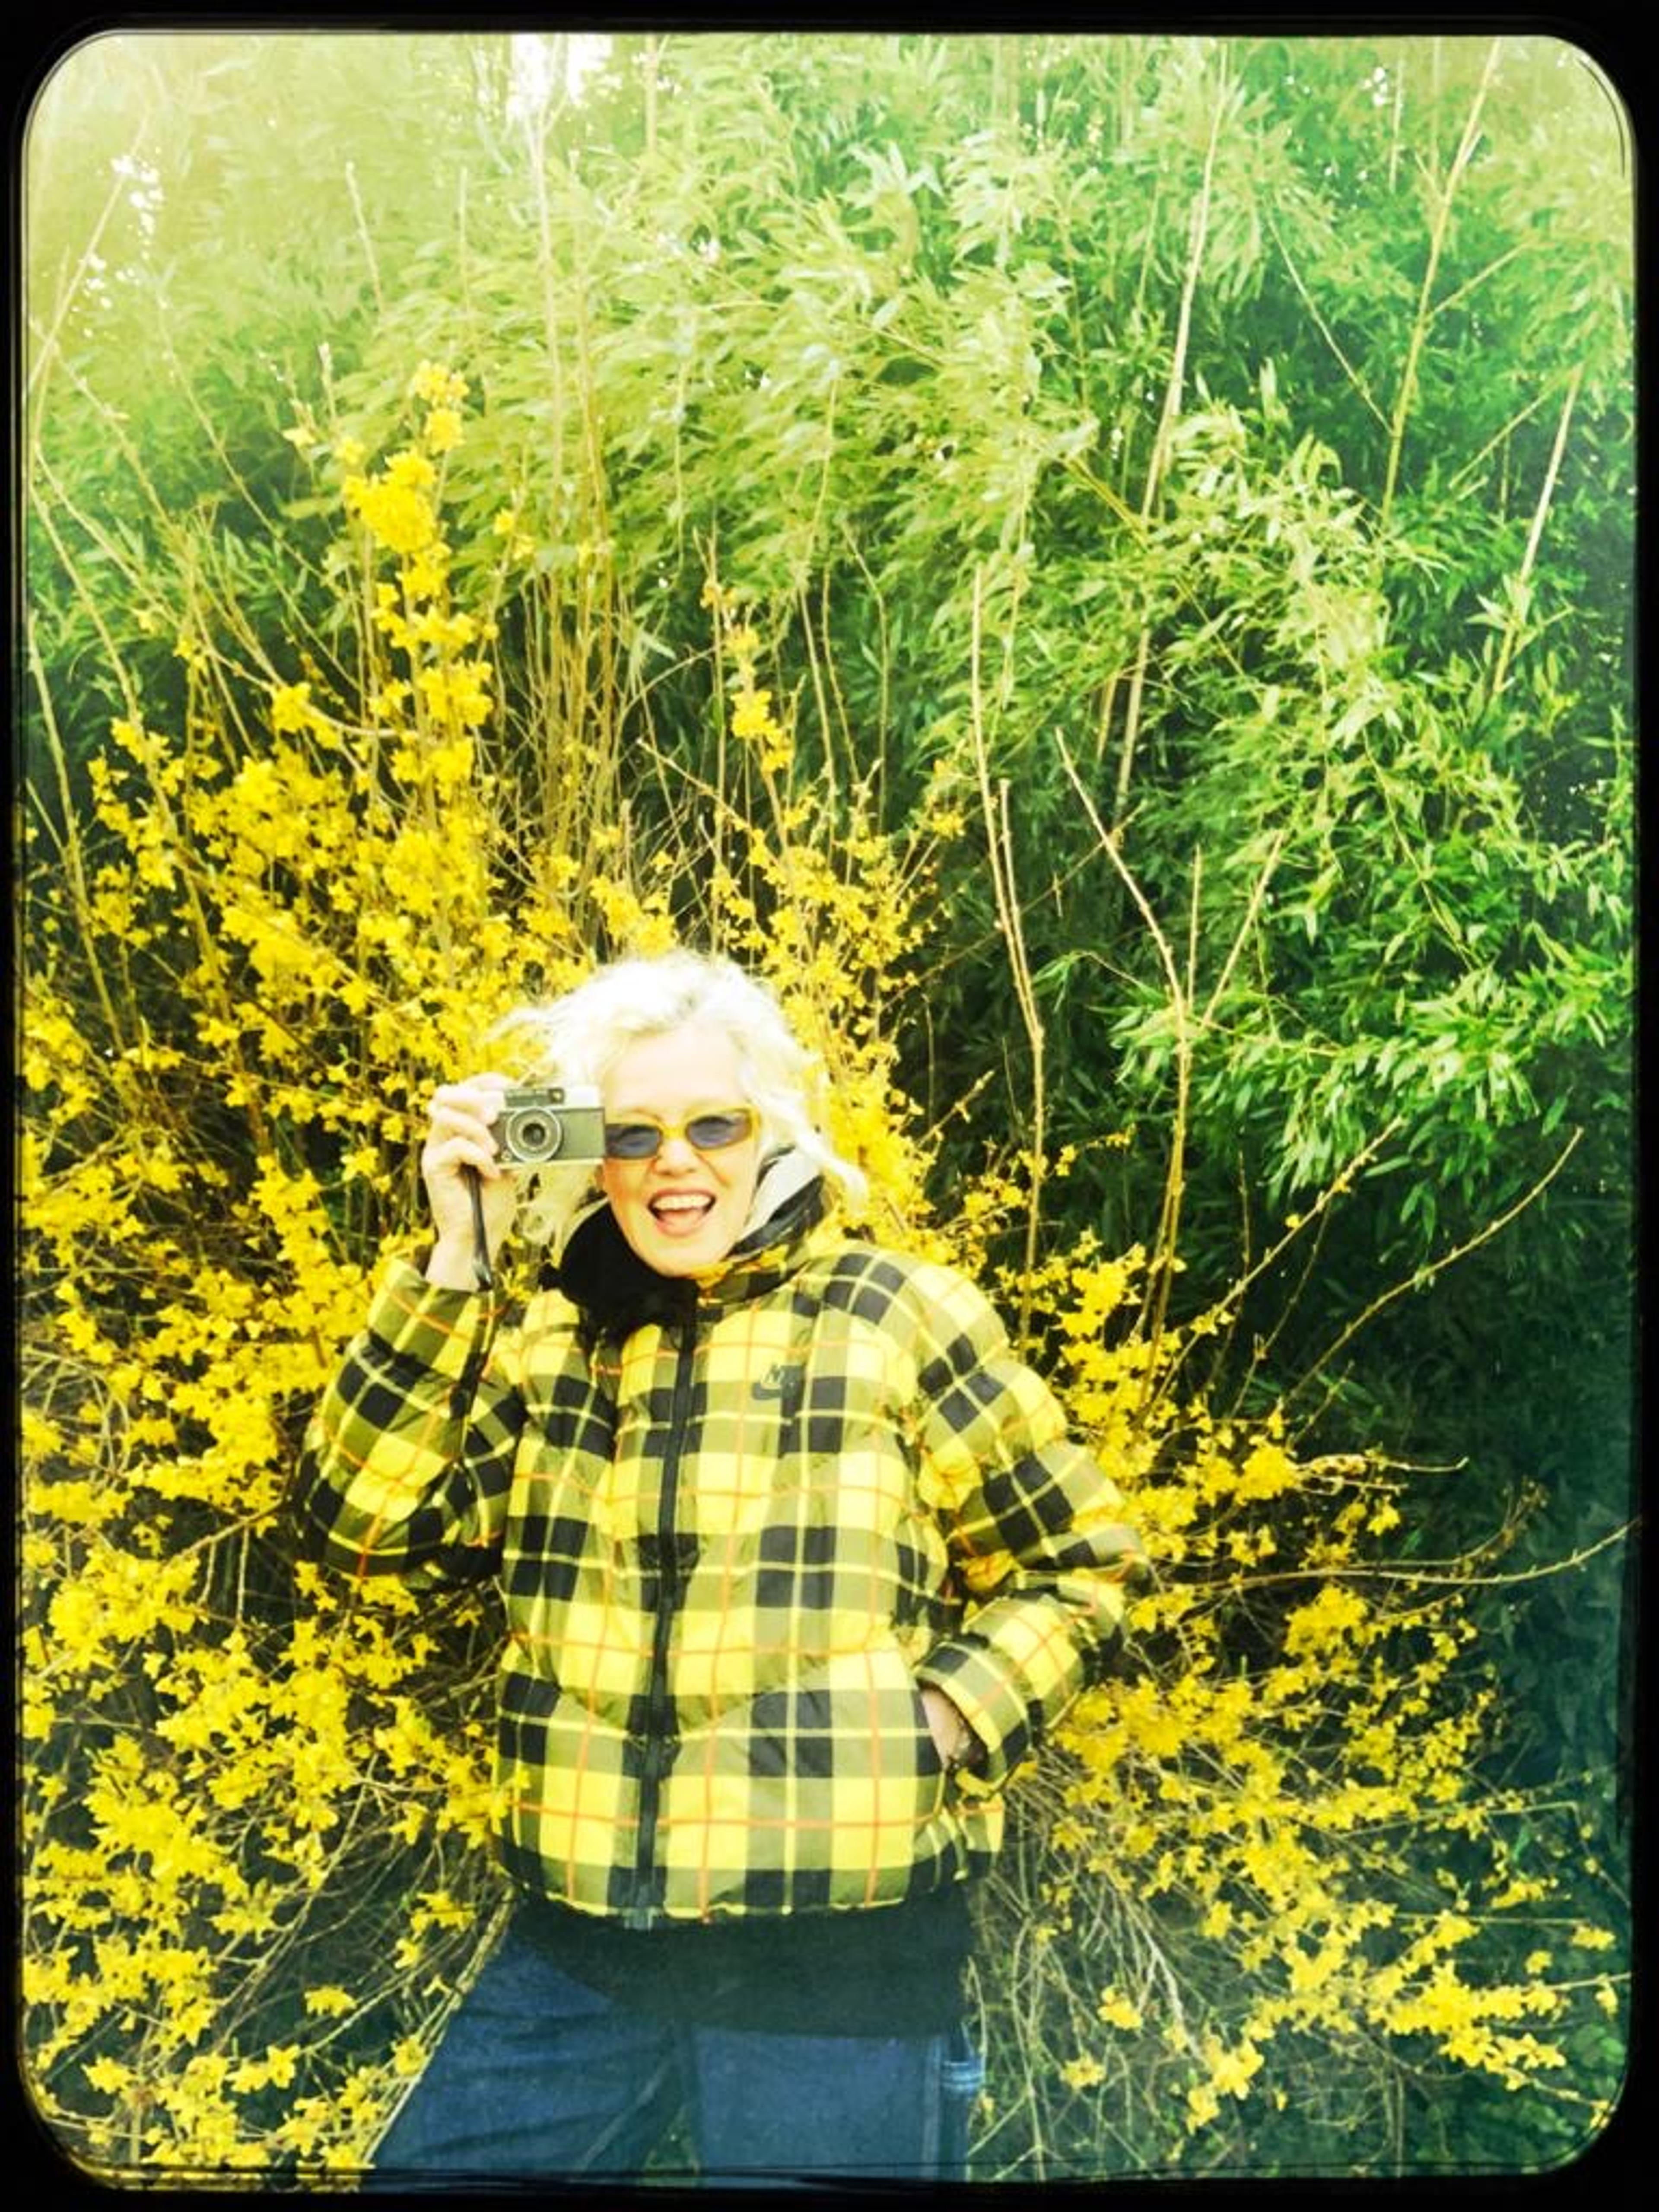 A photograph of a woman in a yellow-and-black plaid jacket holding a camera against a yellow floral background